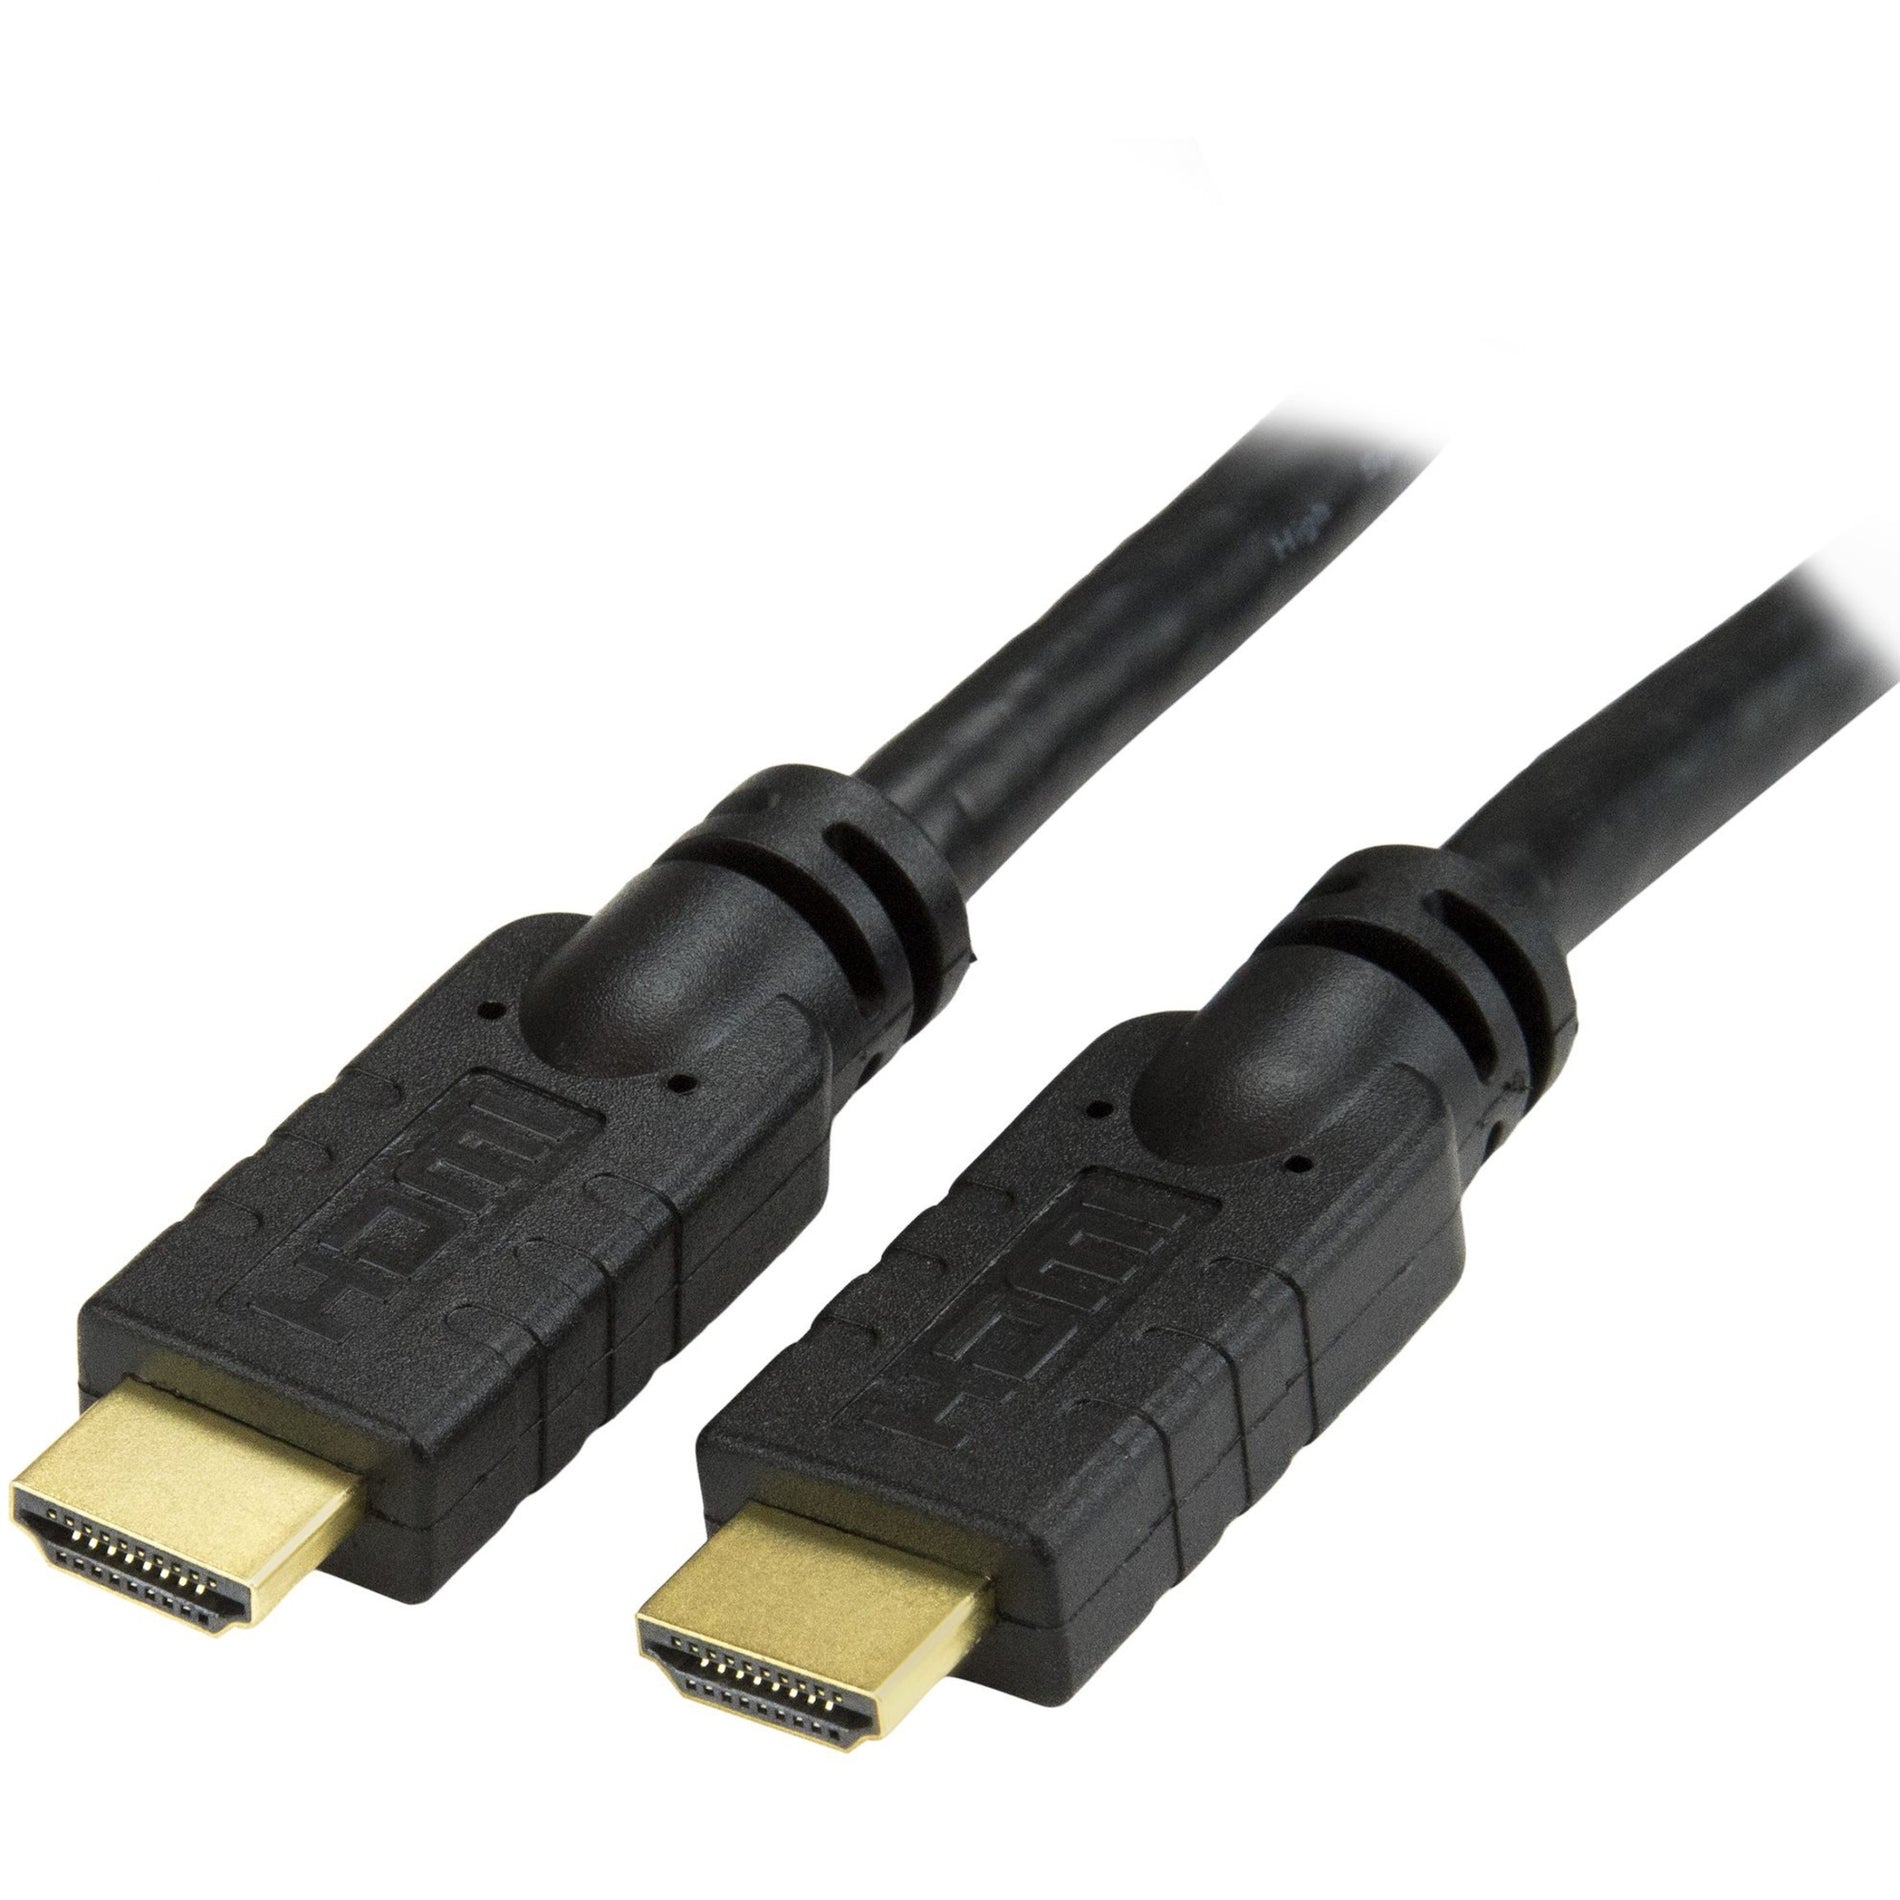 StarTech.com HDMIMM20HS HDMI Audio/Video Cable with Ethernet, 20 ft High Speed HDMI Cable with Ultra HD 4k x 2k, Corrosion Resistant, Gold Plated Connectors